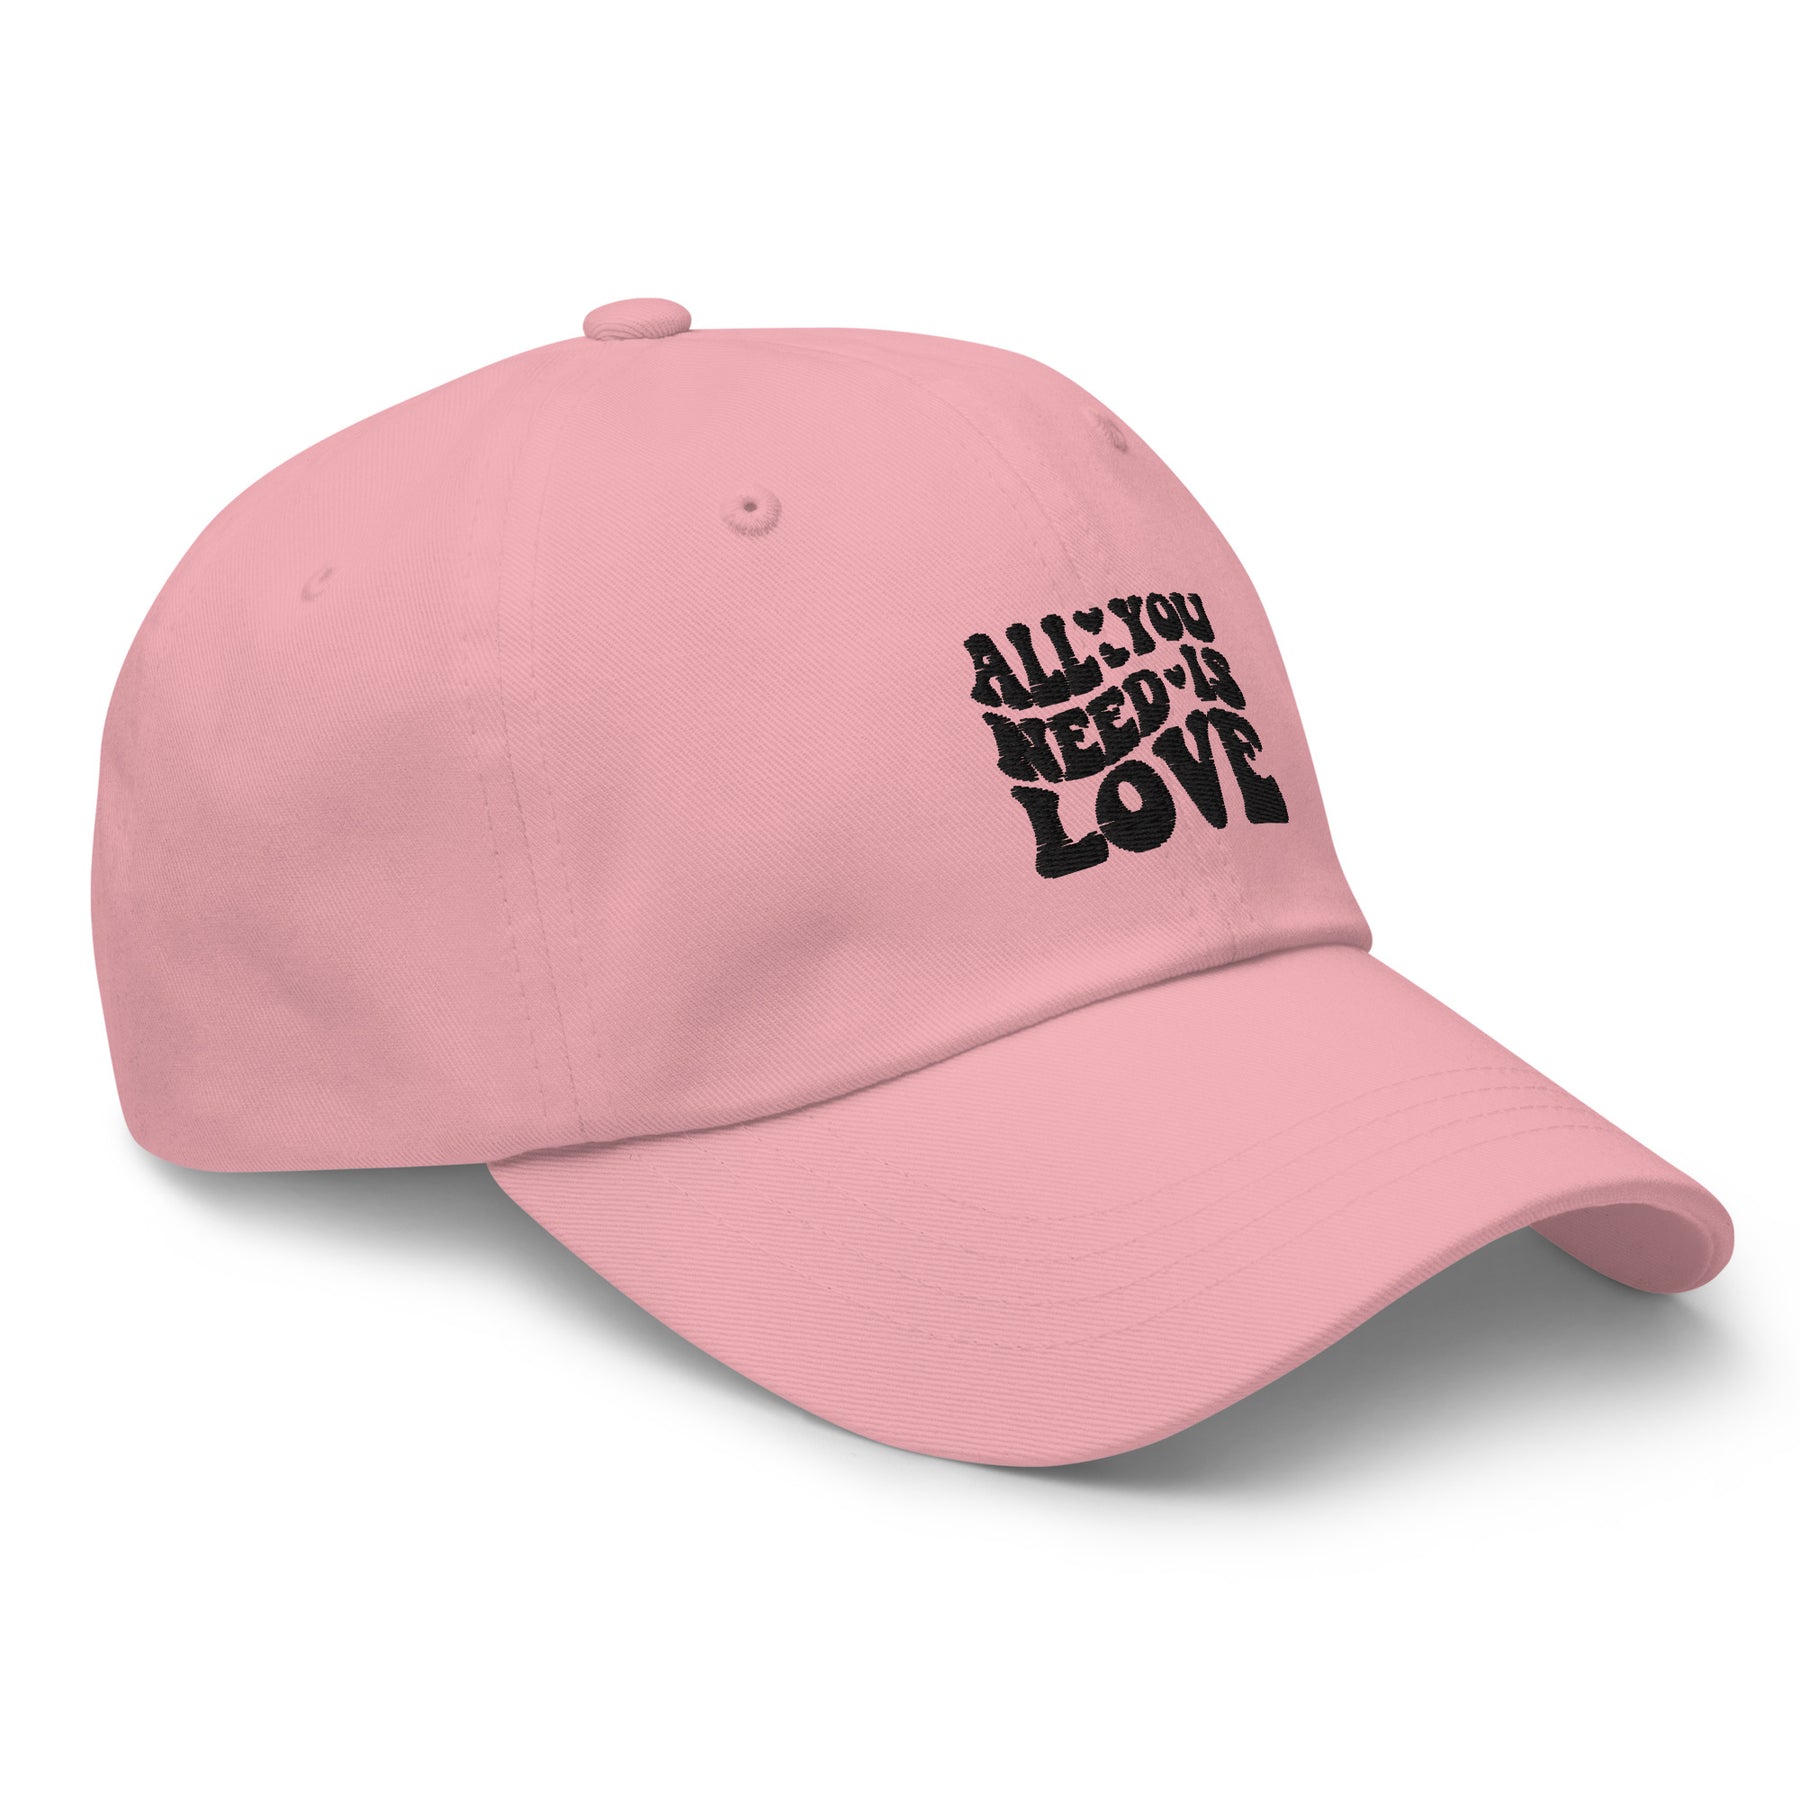 Casquette | All you need is love